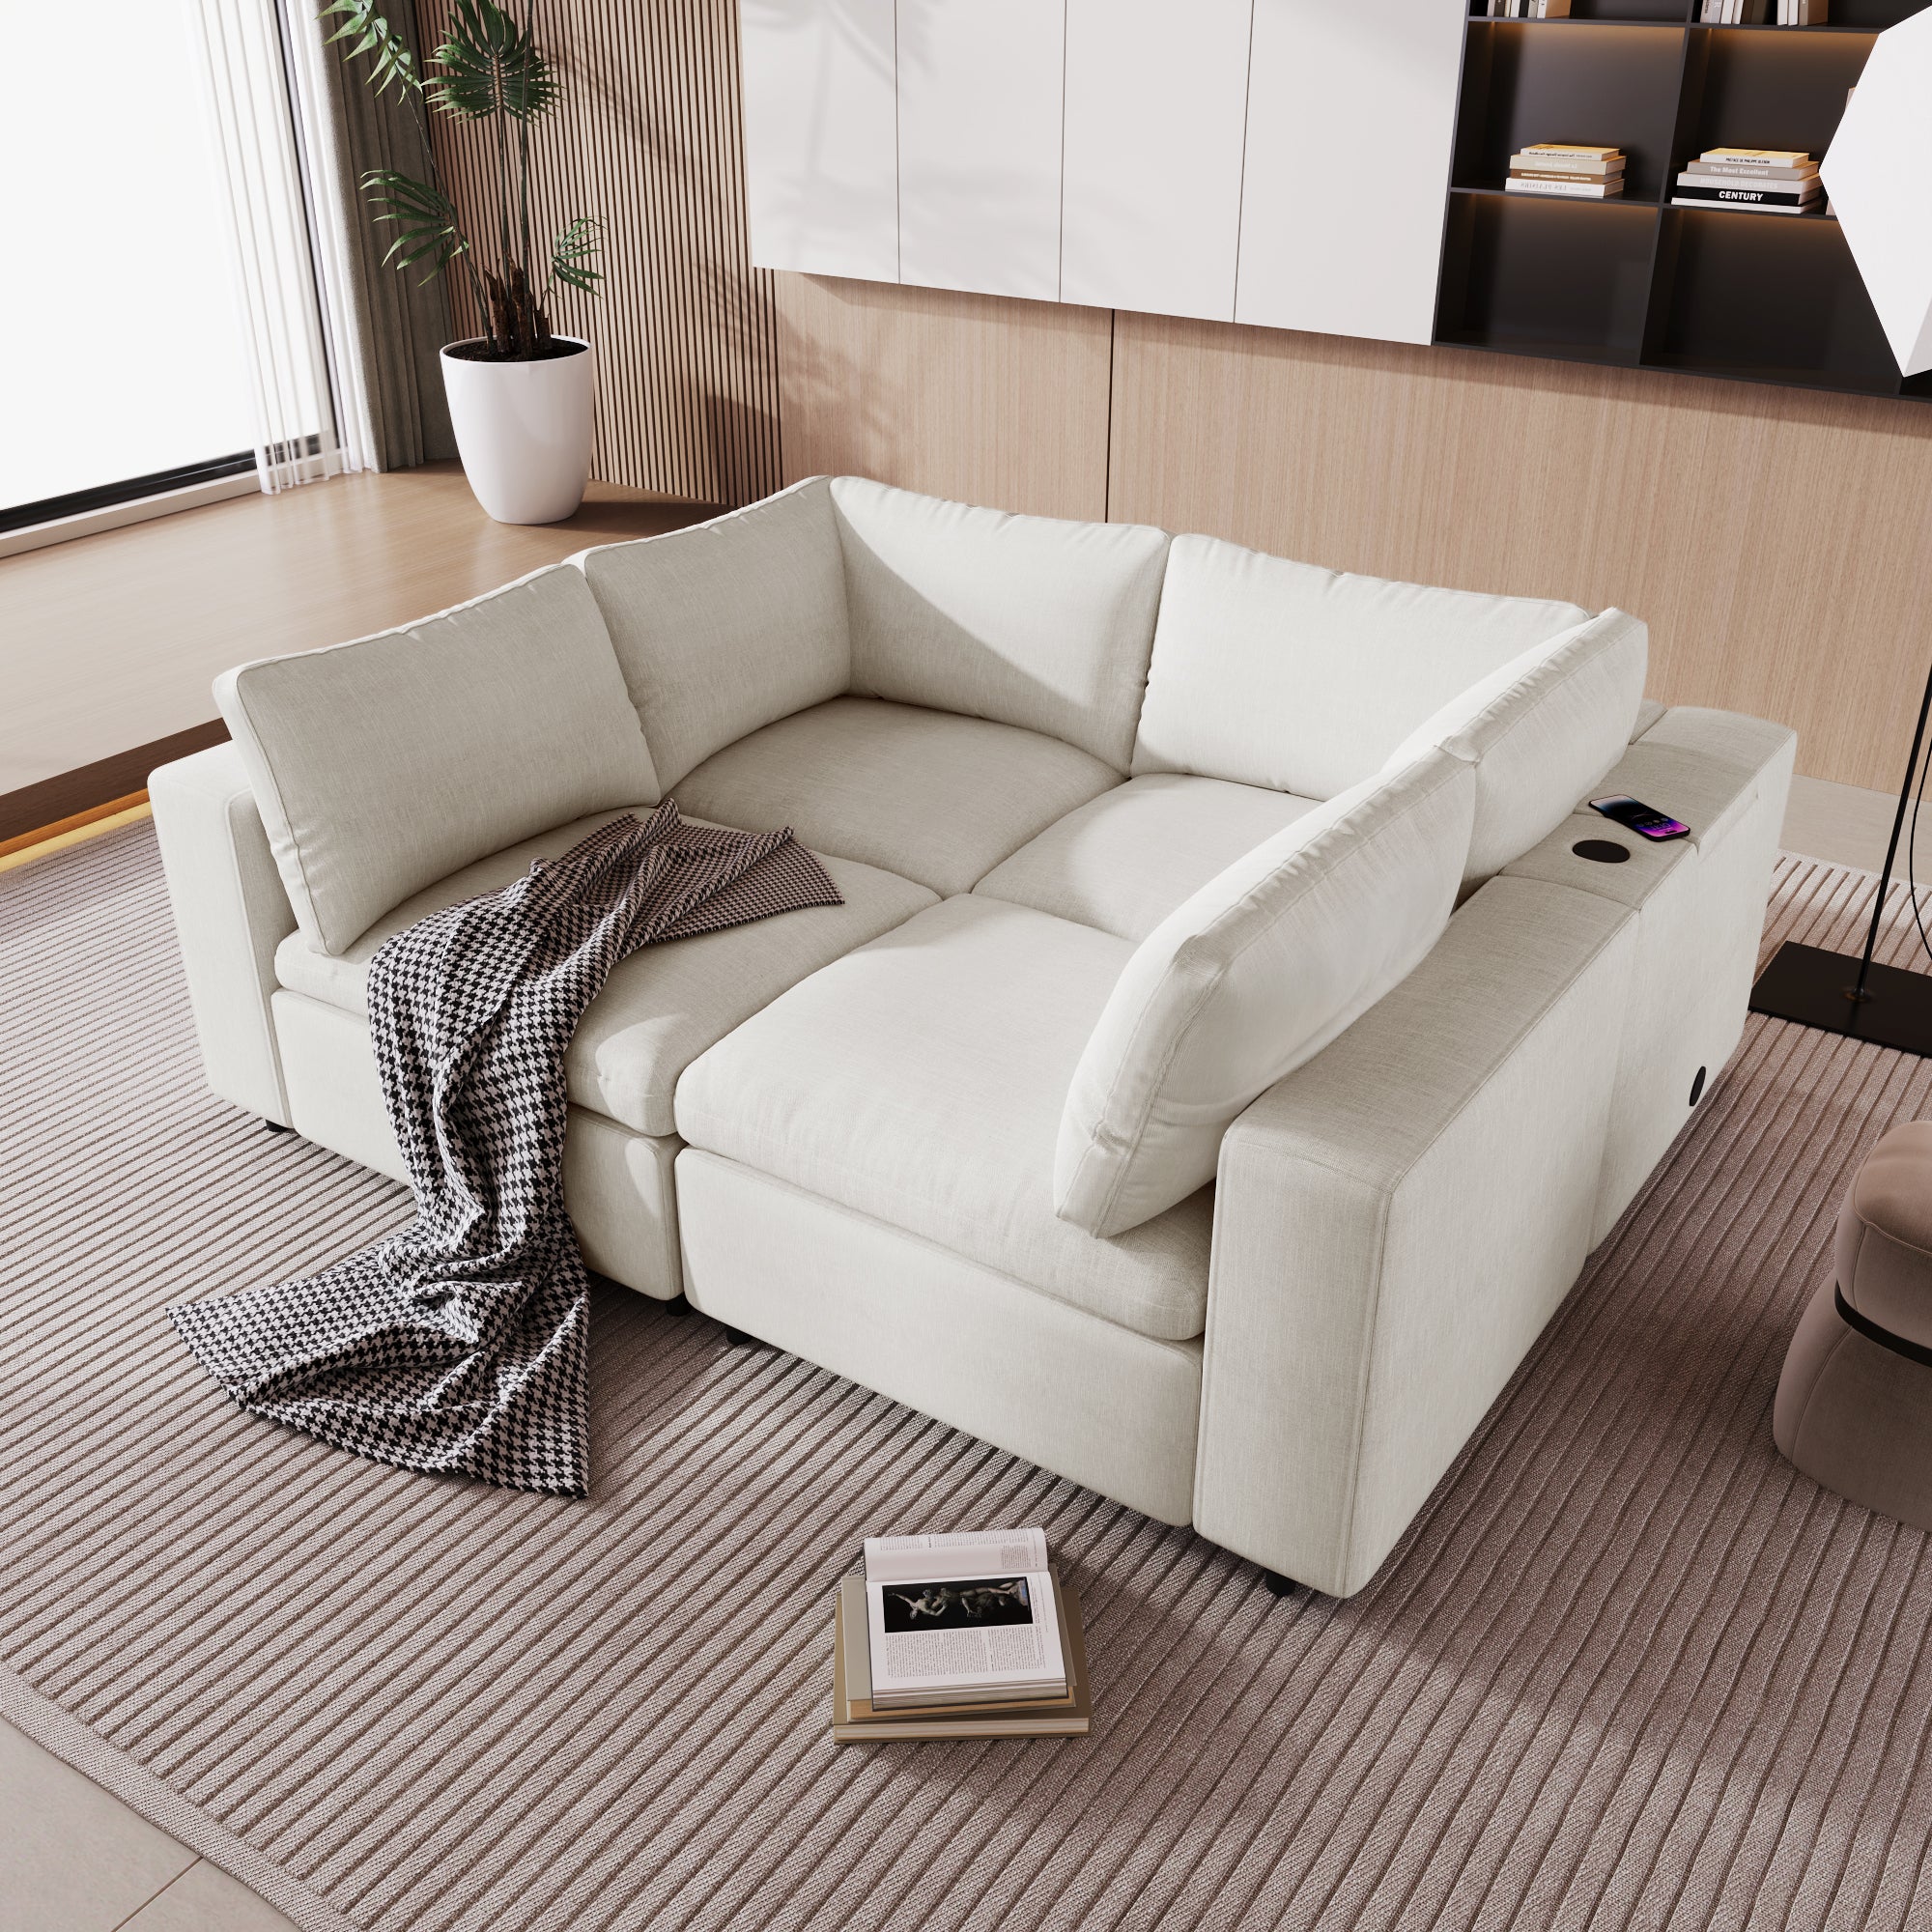 Beckham Linen 4 Seater Modular Sectional Sofa with USB Charge Ports, Wireless Charging and Built-in Bluetooth Speaker